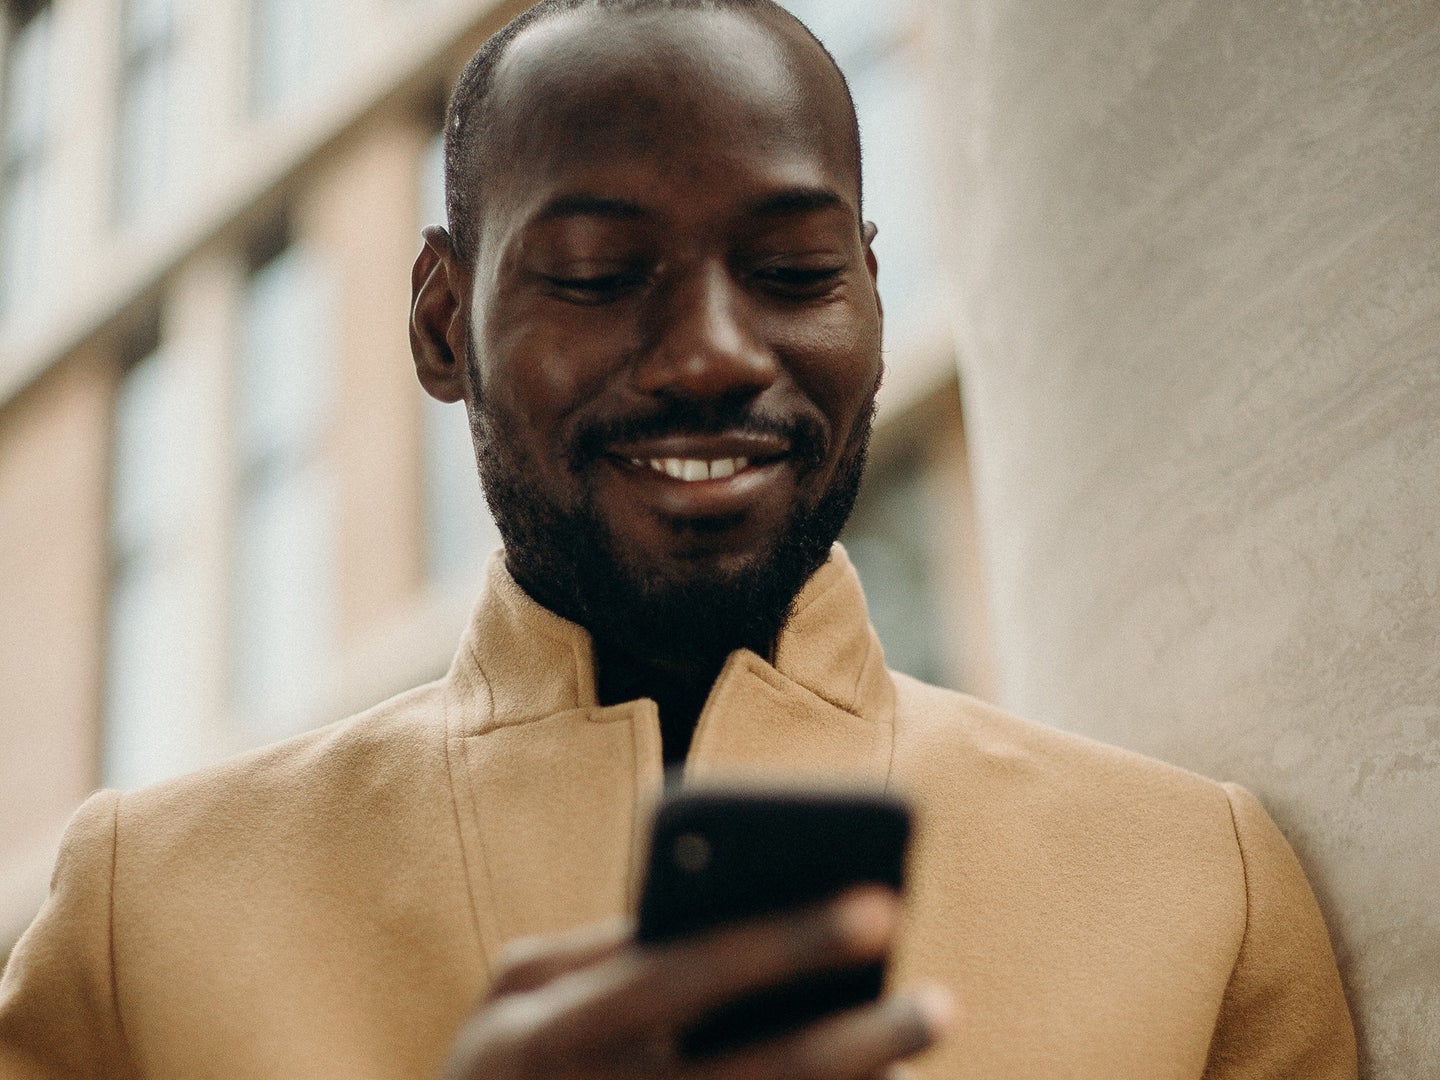 A well-dressed Black man with a bald head smiling while looking at his phone, perhaps wondering how to delete a tweet.